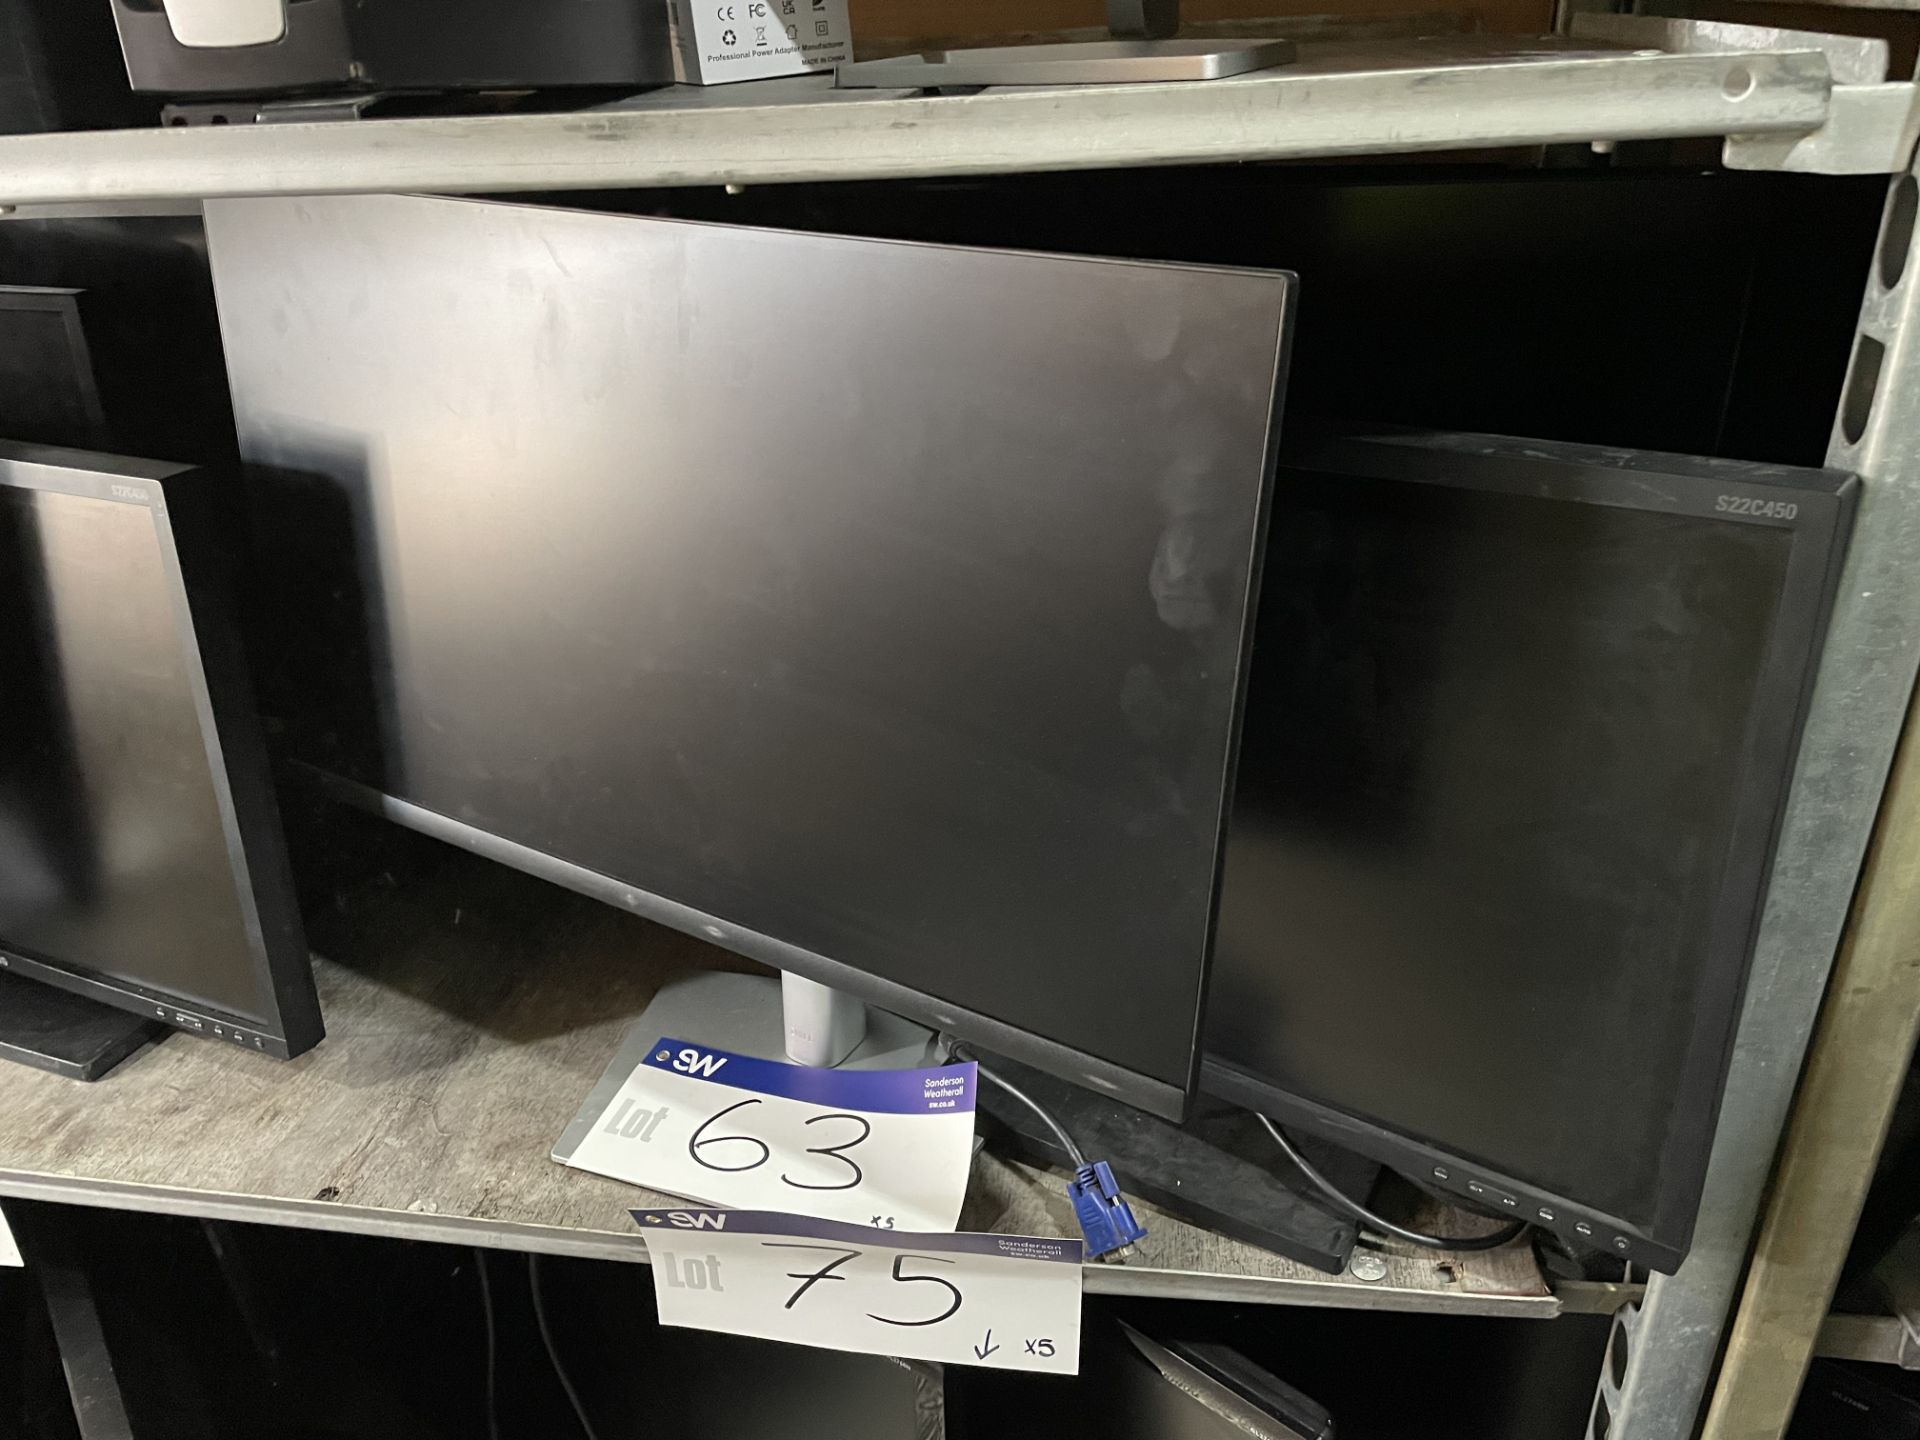 Five Various Monitors Please read the following important notes:- ***Overseas buyers - All lots